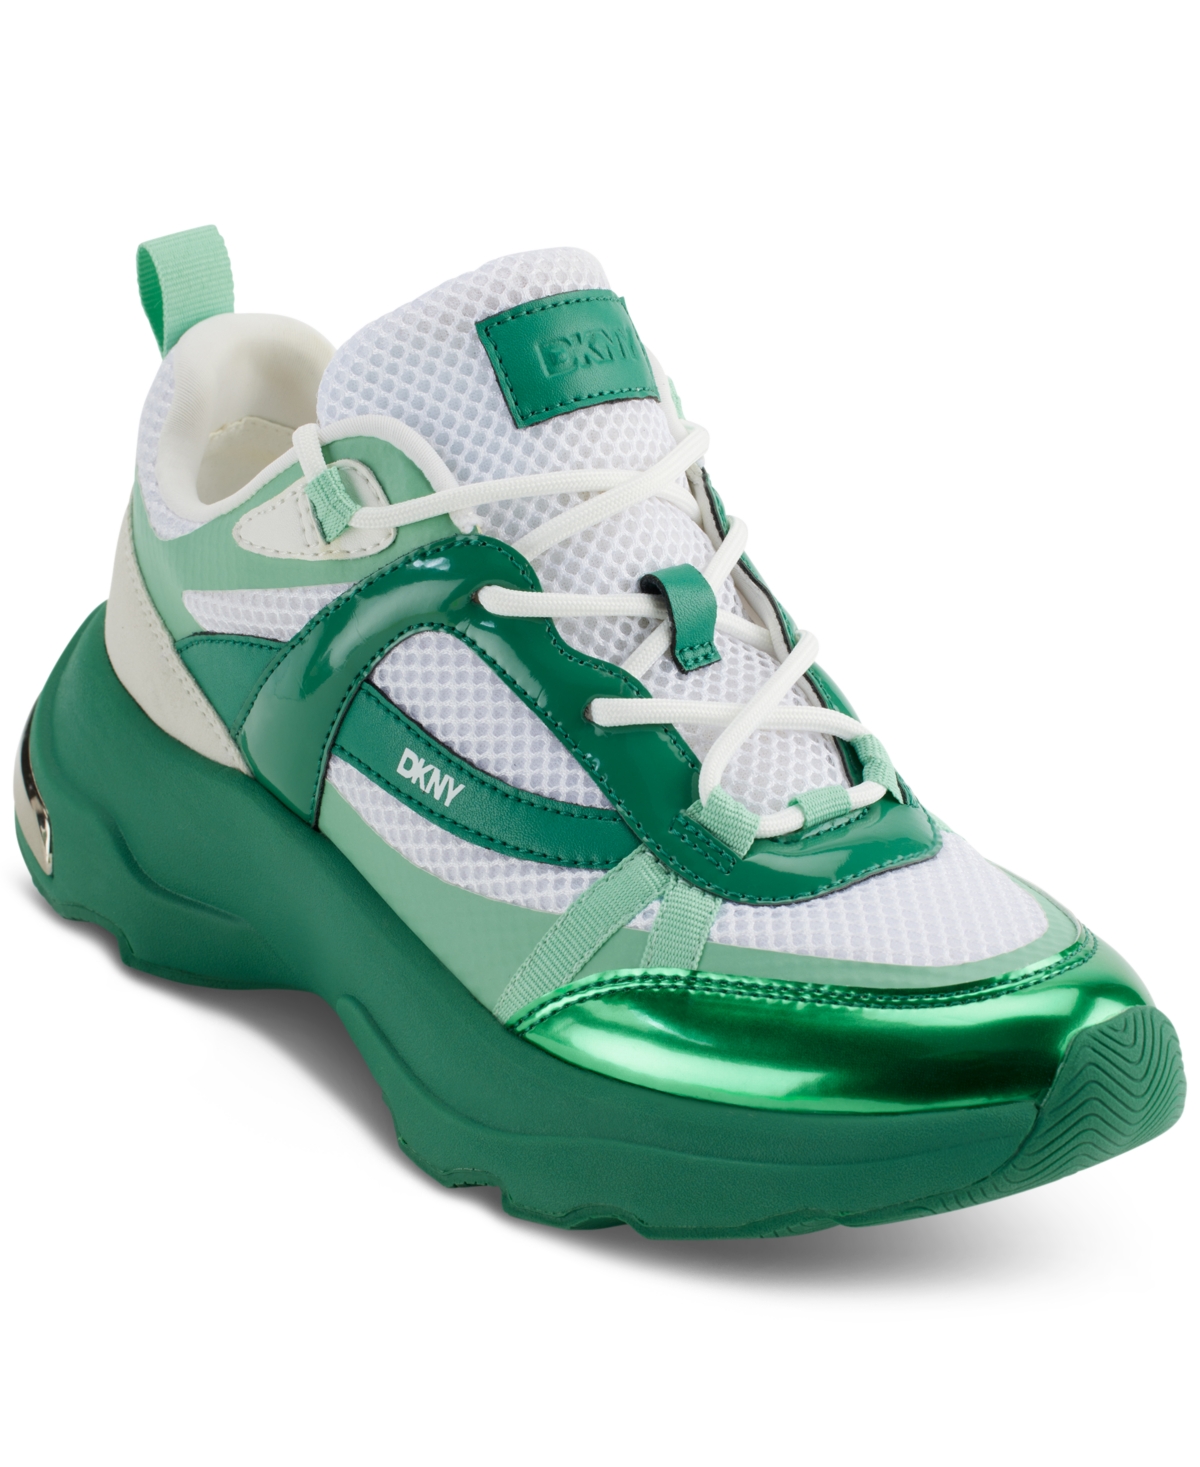 Women's Juna Lace-Up Running Sneakers - Bright White/ Green